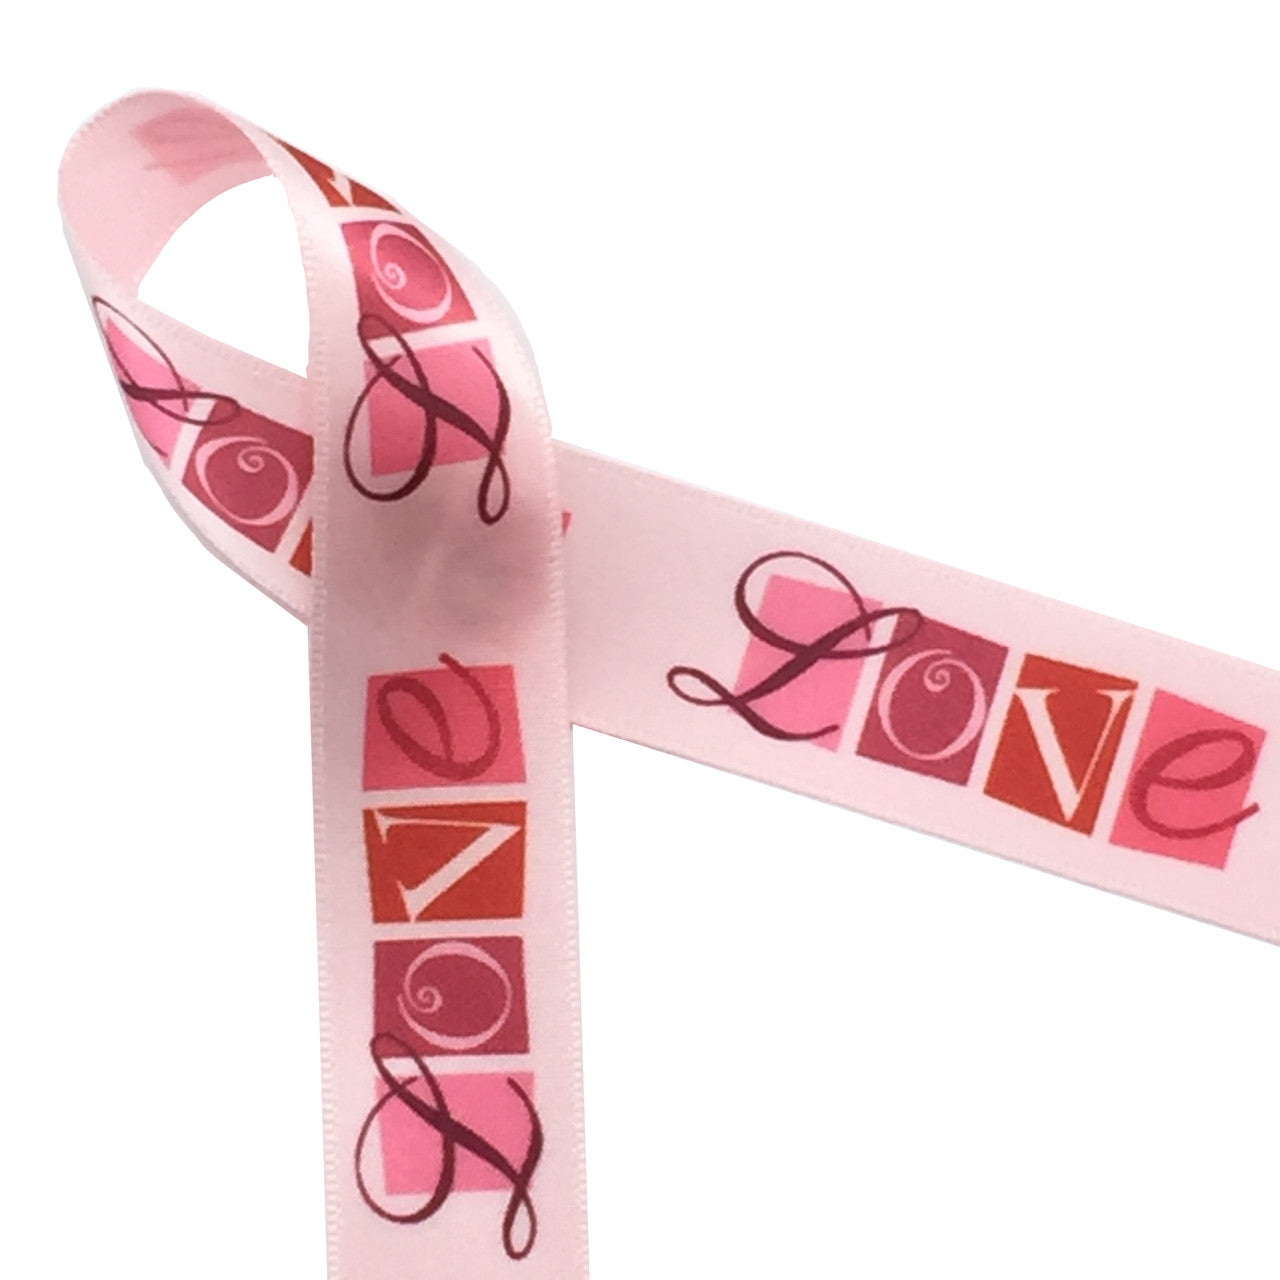 Valentine ribbon hearts in pink and red tossed on 7/8 light pink single  face satin